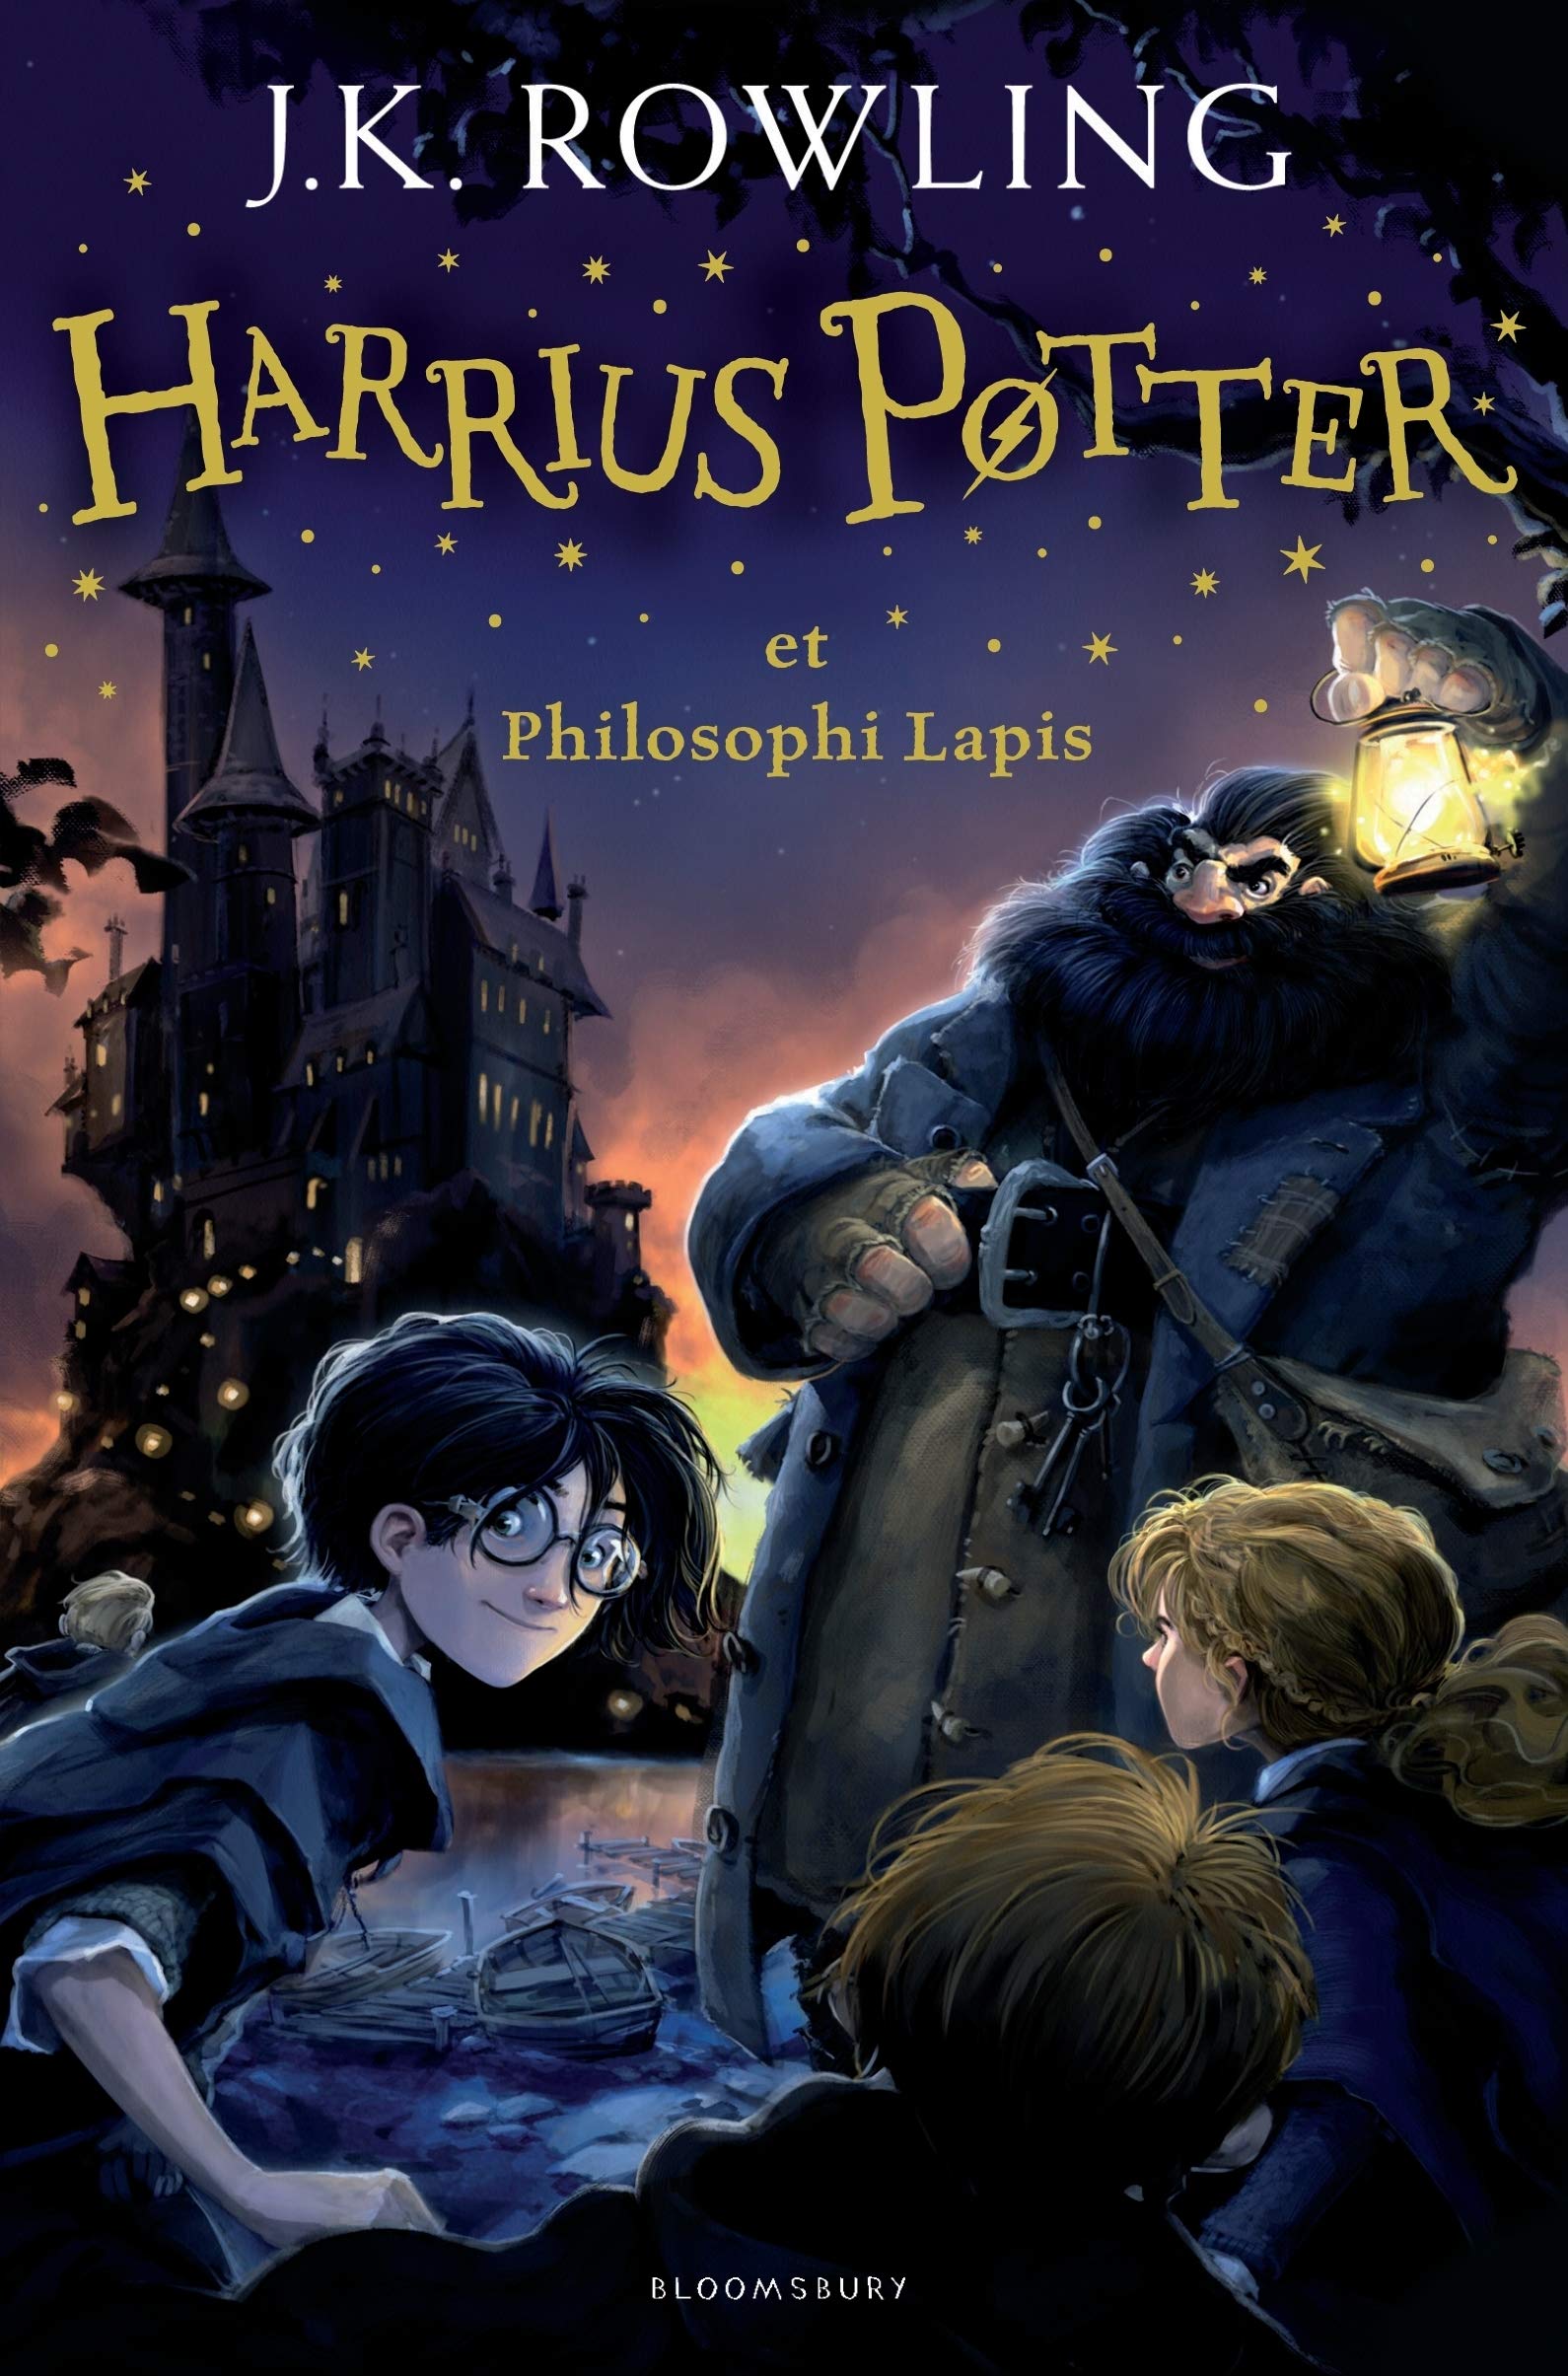 Harry Potter and the Philosophers Stone (Latin) : Harrius Potter et Philosophi Lapis (Latin) (Hardcover)